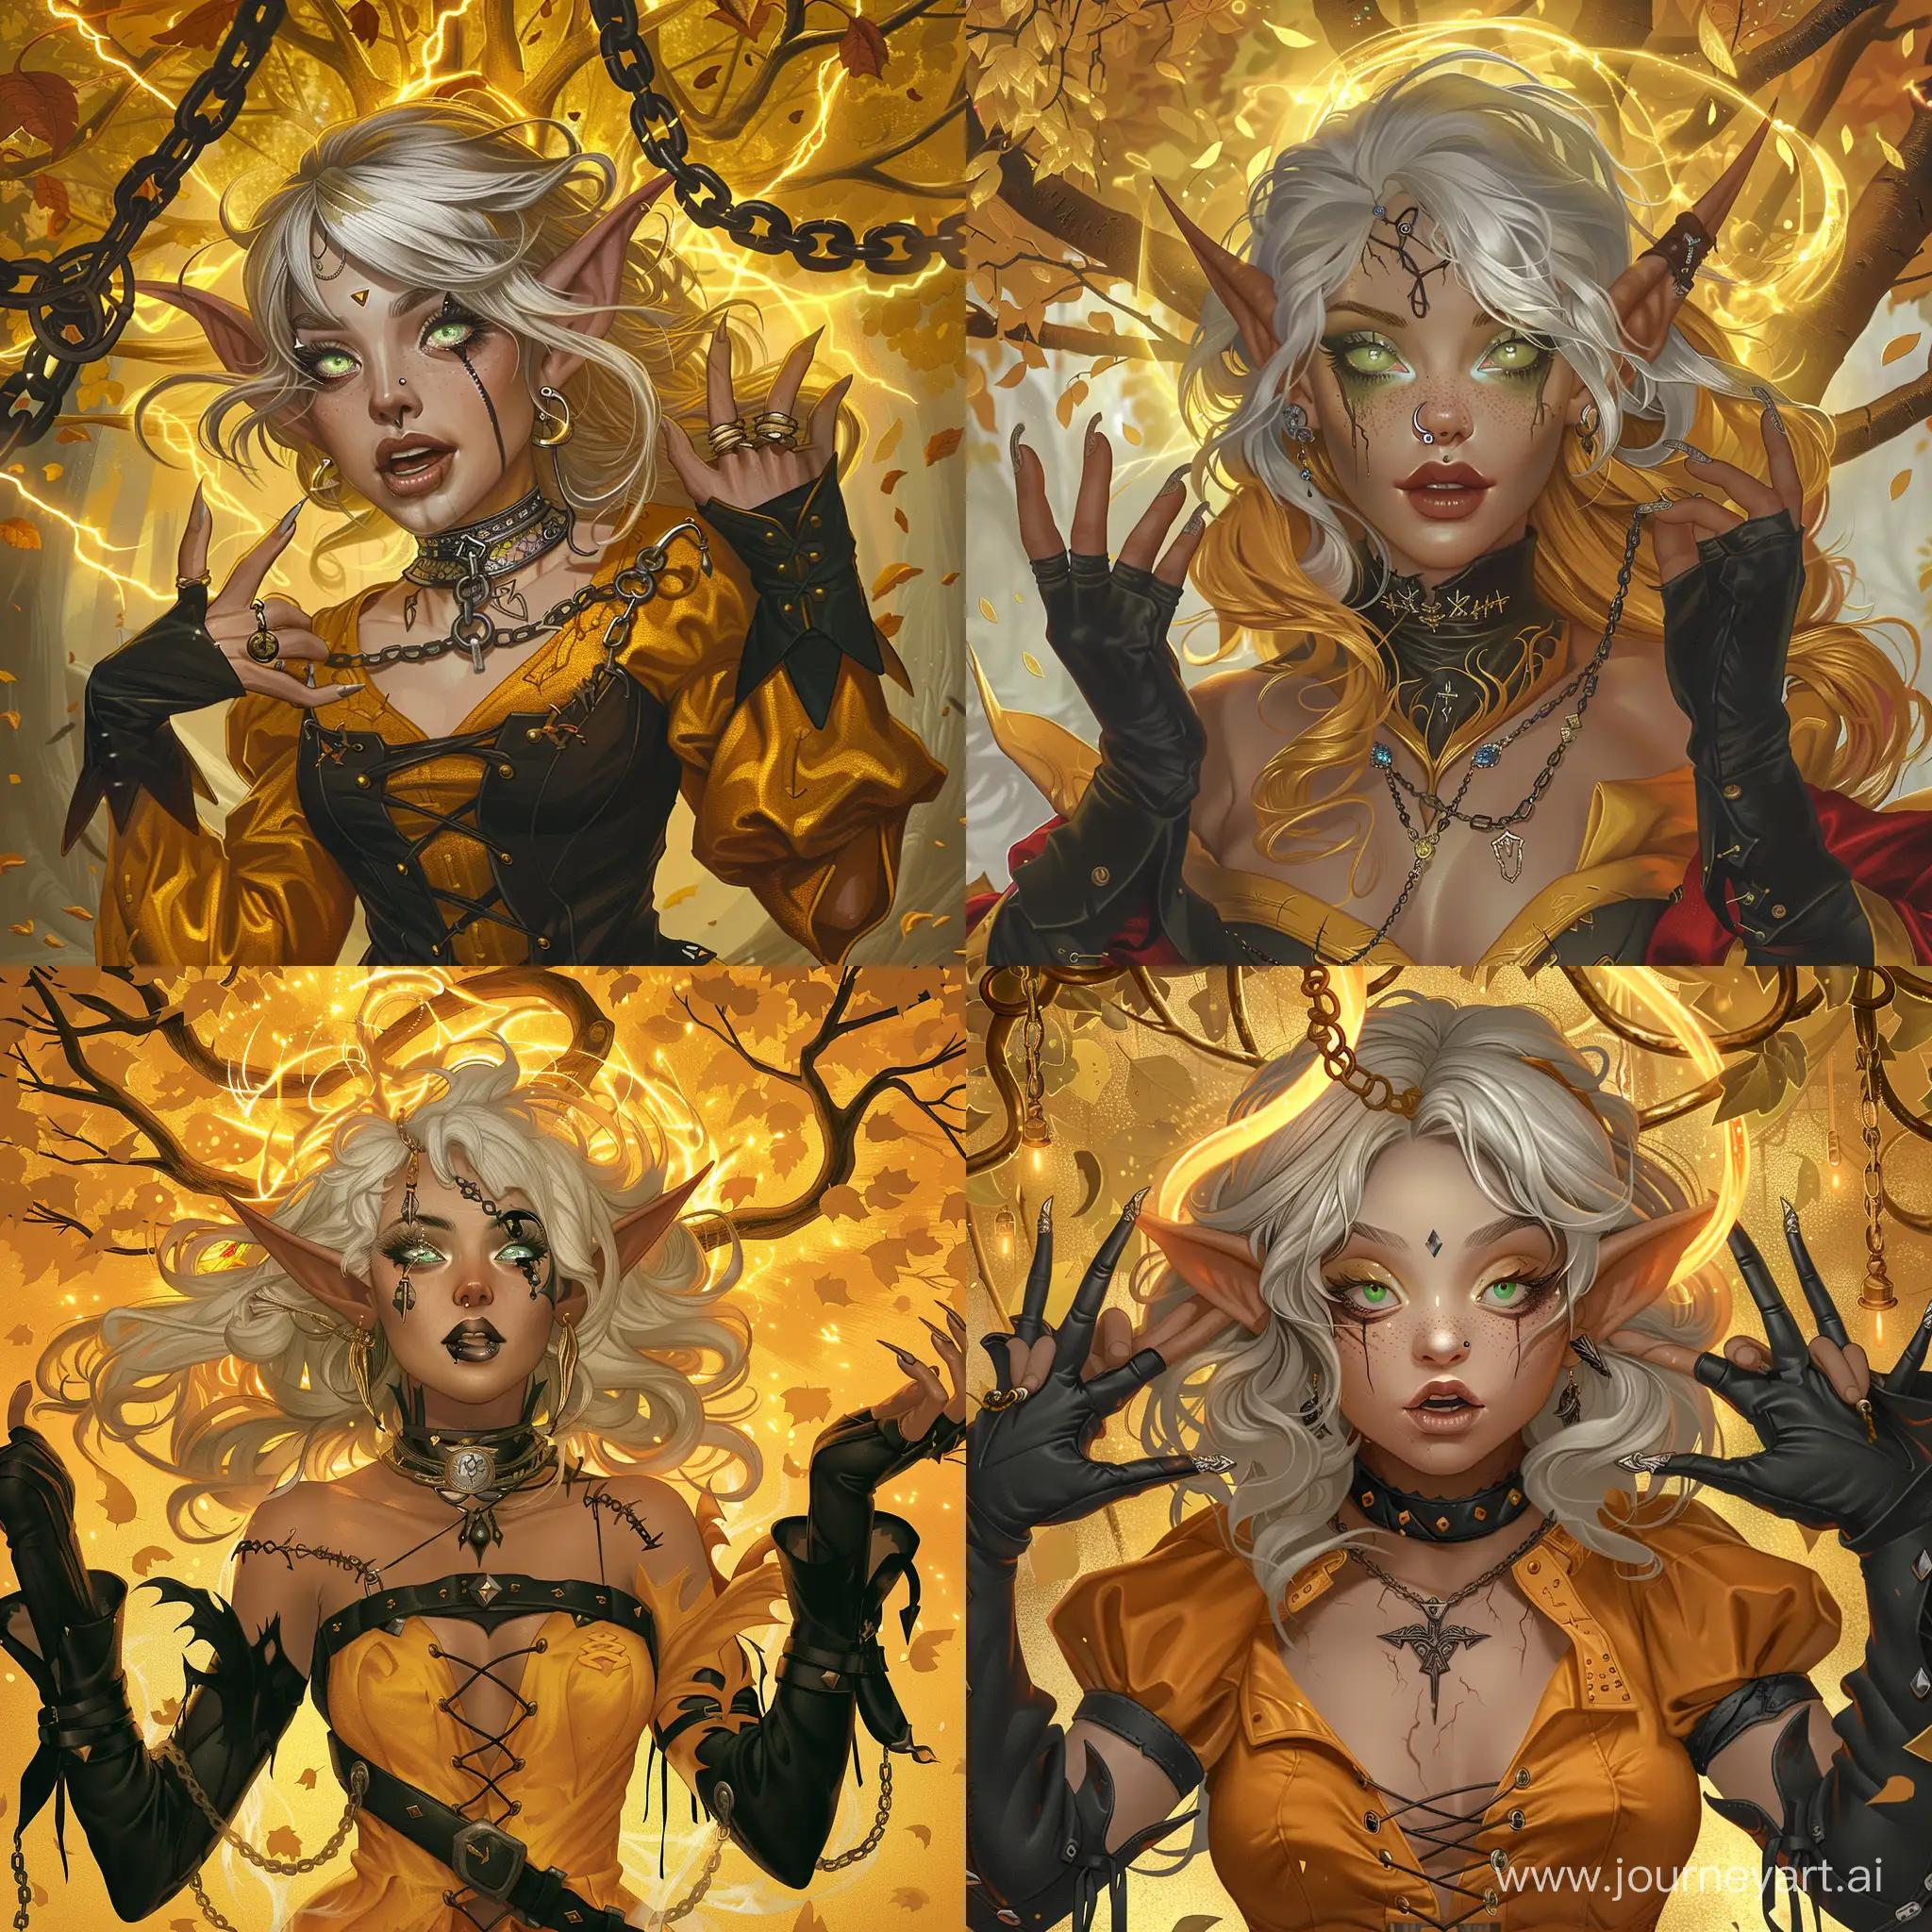 Medieval-Witch-with-Golden-Hair-Conjuring-Magic-under-a-Golden-Tree